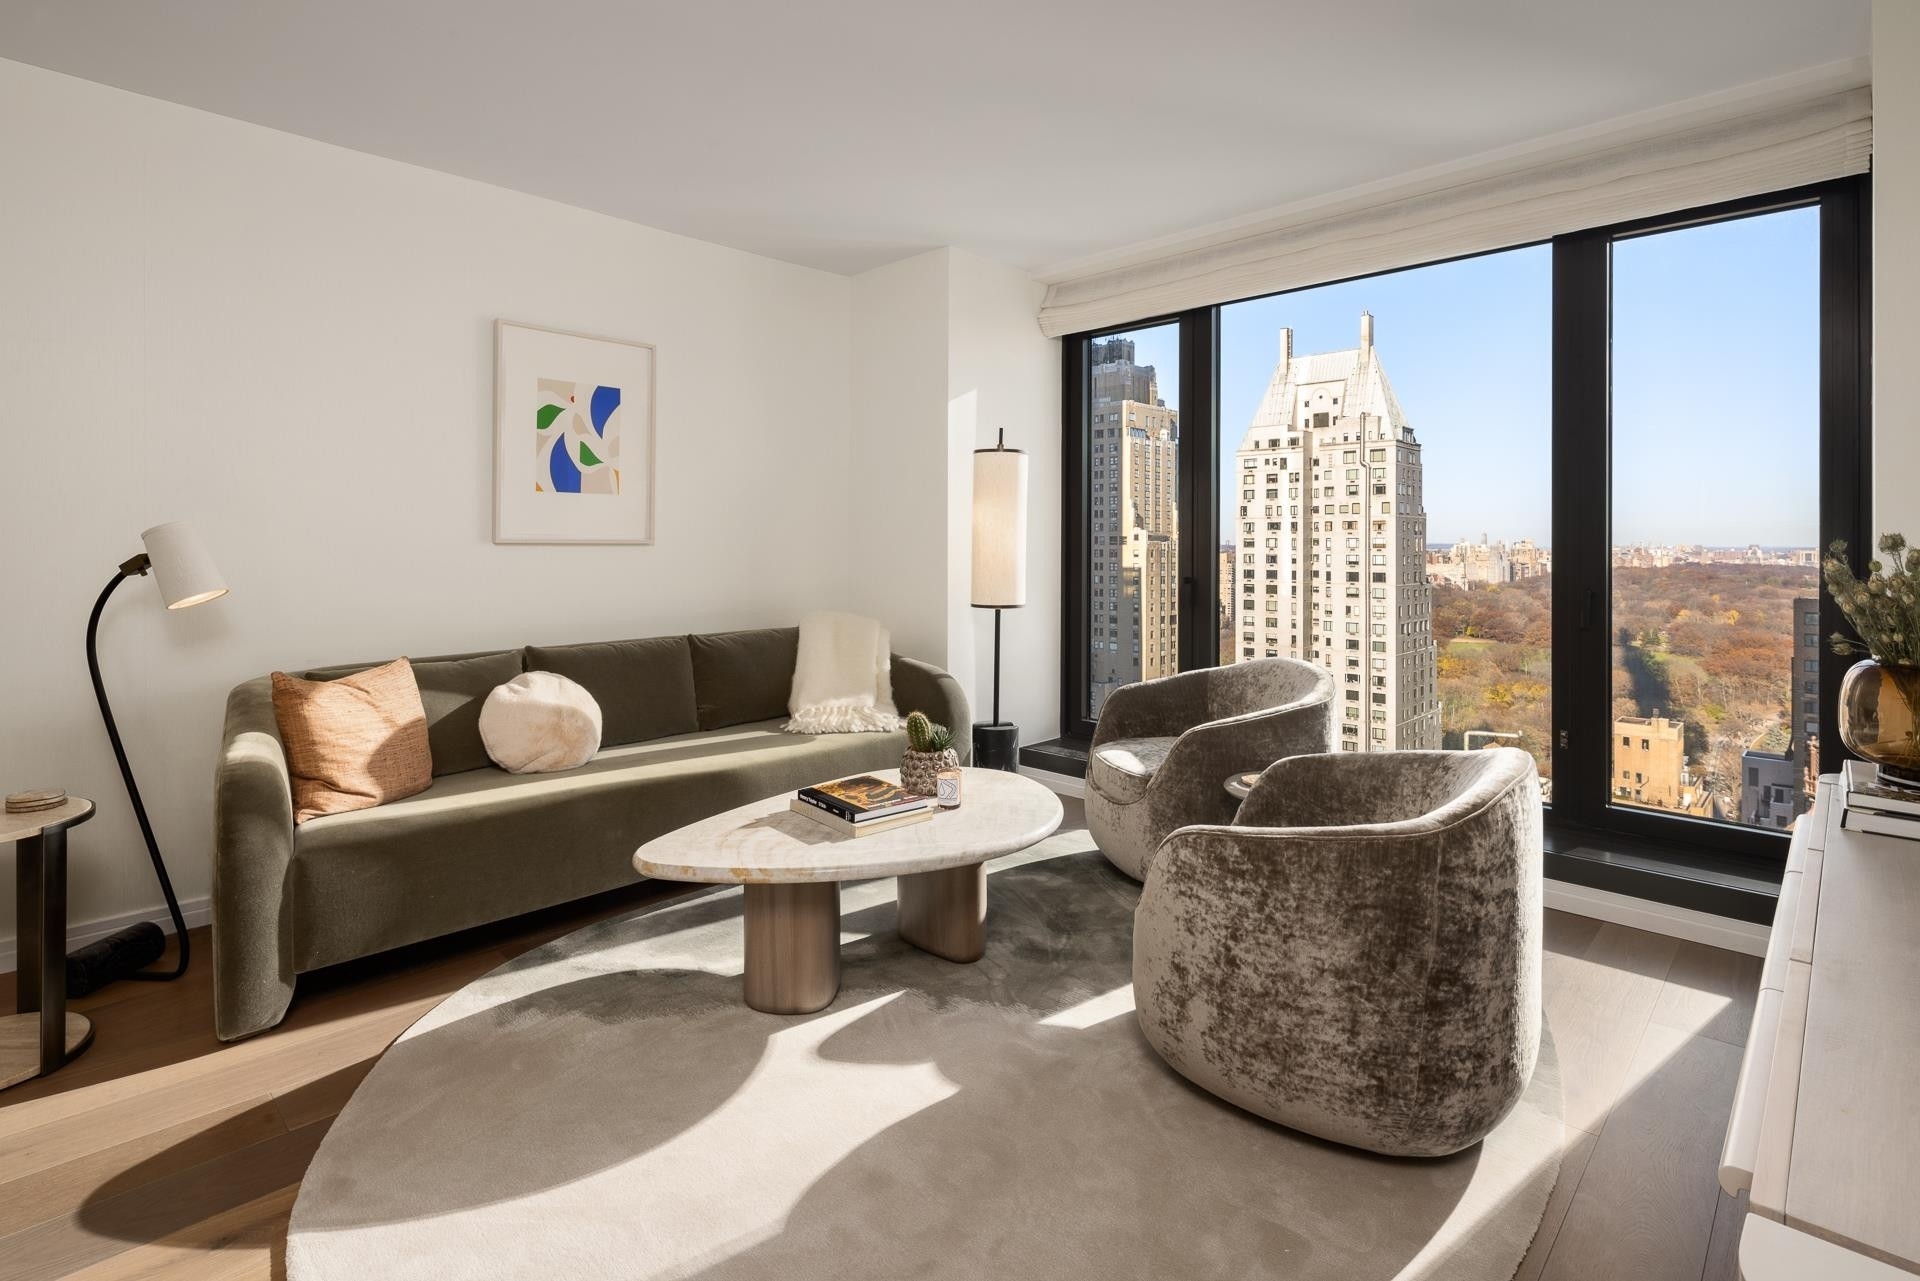 Condominium for Sale at One11, 111 W 56TH ST, 34K Midtown West, New York, NY 10019